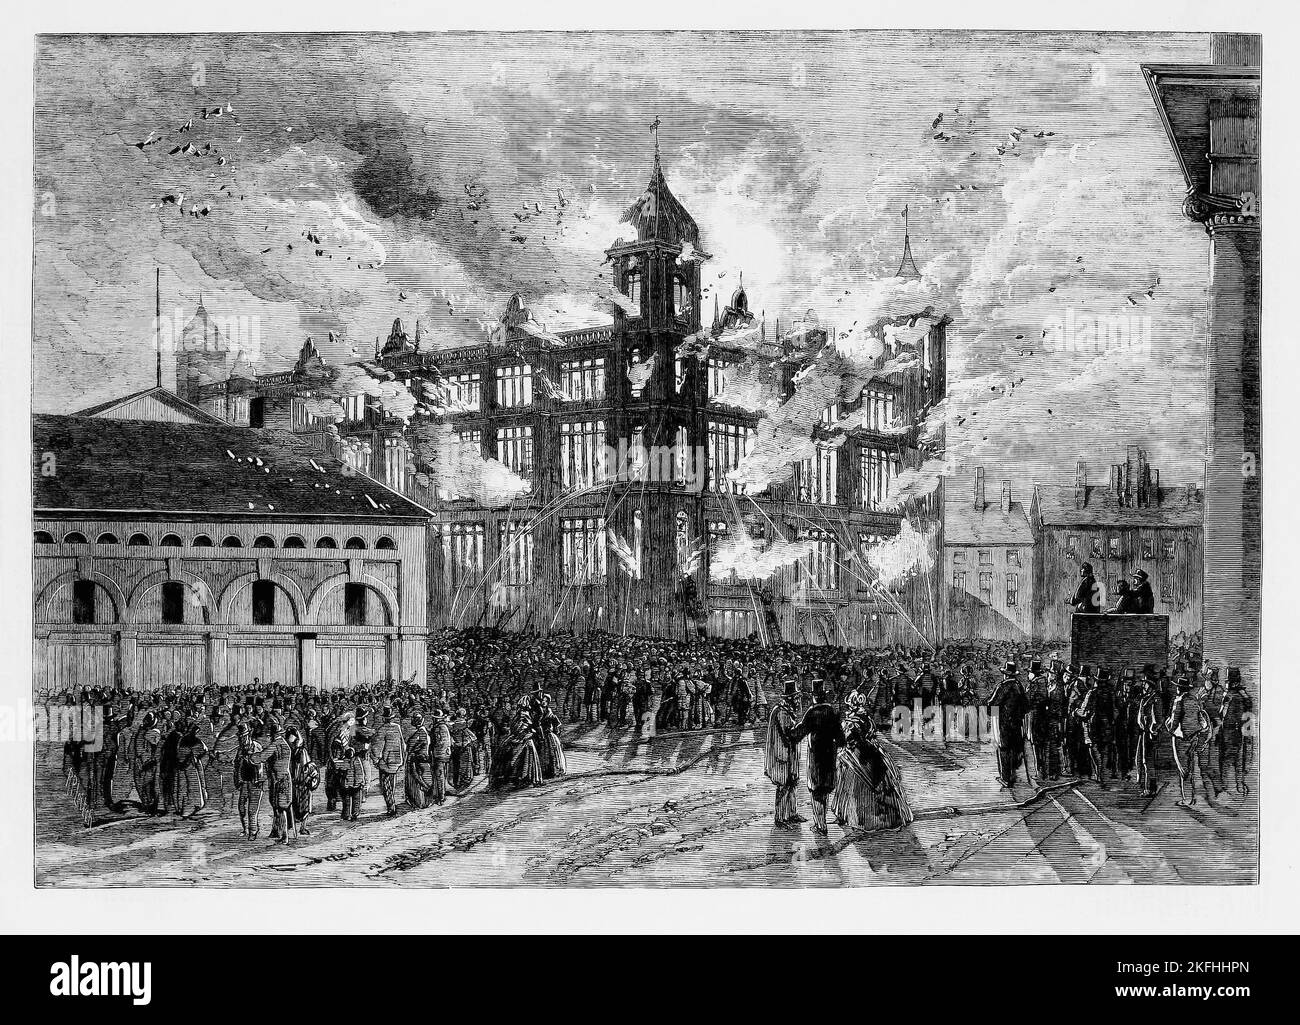 The disastrous fire of 1860 that closed Liverpool Sailors' Home, for two years. Built in Canning Place, it provided safe, inexpensive lodging for sailors, along with educational and recreational opportunities. It also played a pivotal role in establishing Liverpool as one of the world's successful commercial seaports following the dismantling of the Slave trade. The neo-Elizabethan Tudor style building was designed by Liverpool-based architect John Cunningham (1799-1873) was demolished in 1974, a few years after its closure in 1969.. Stock Photo